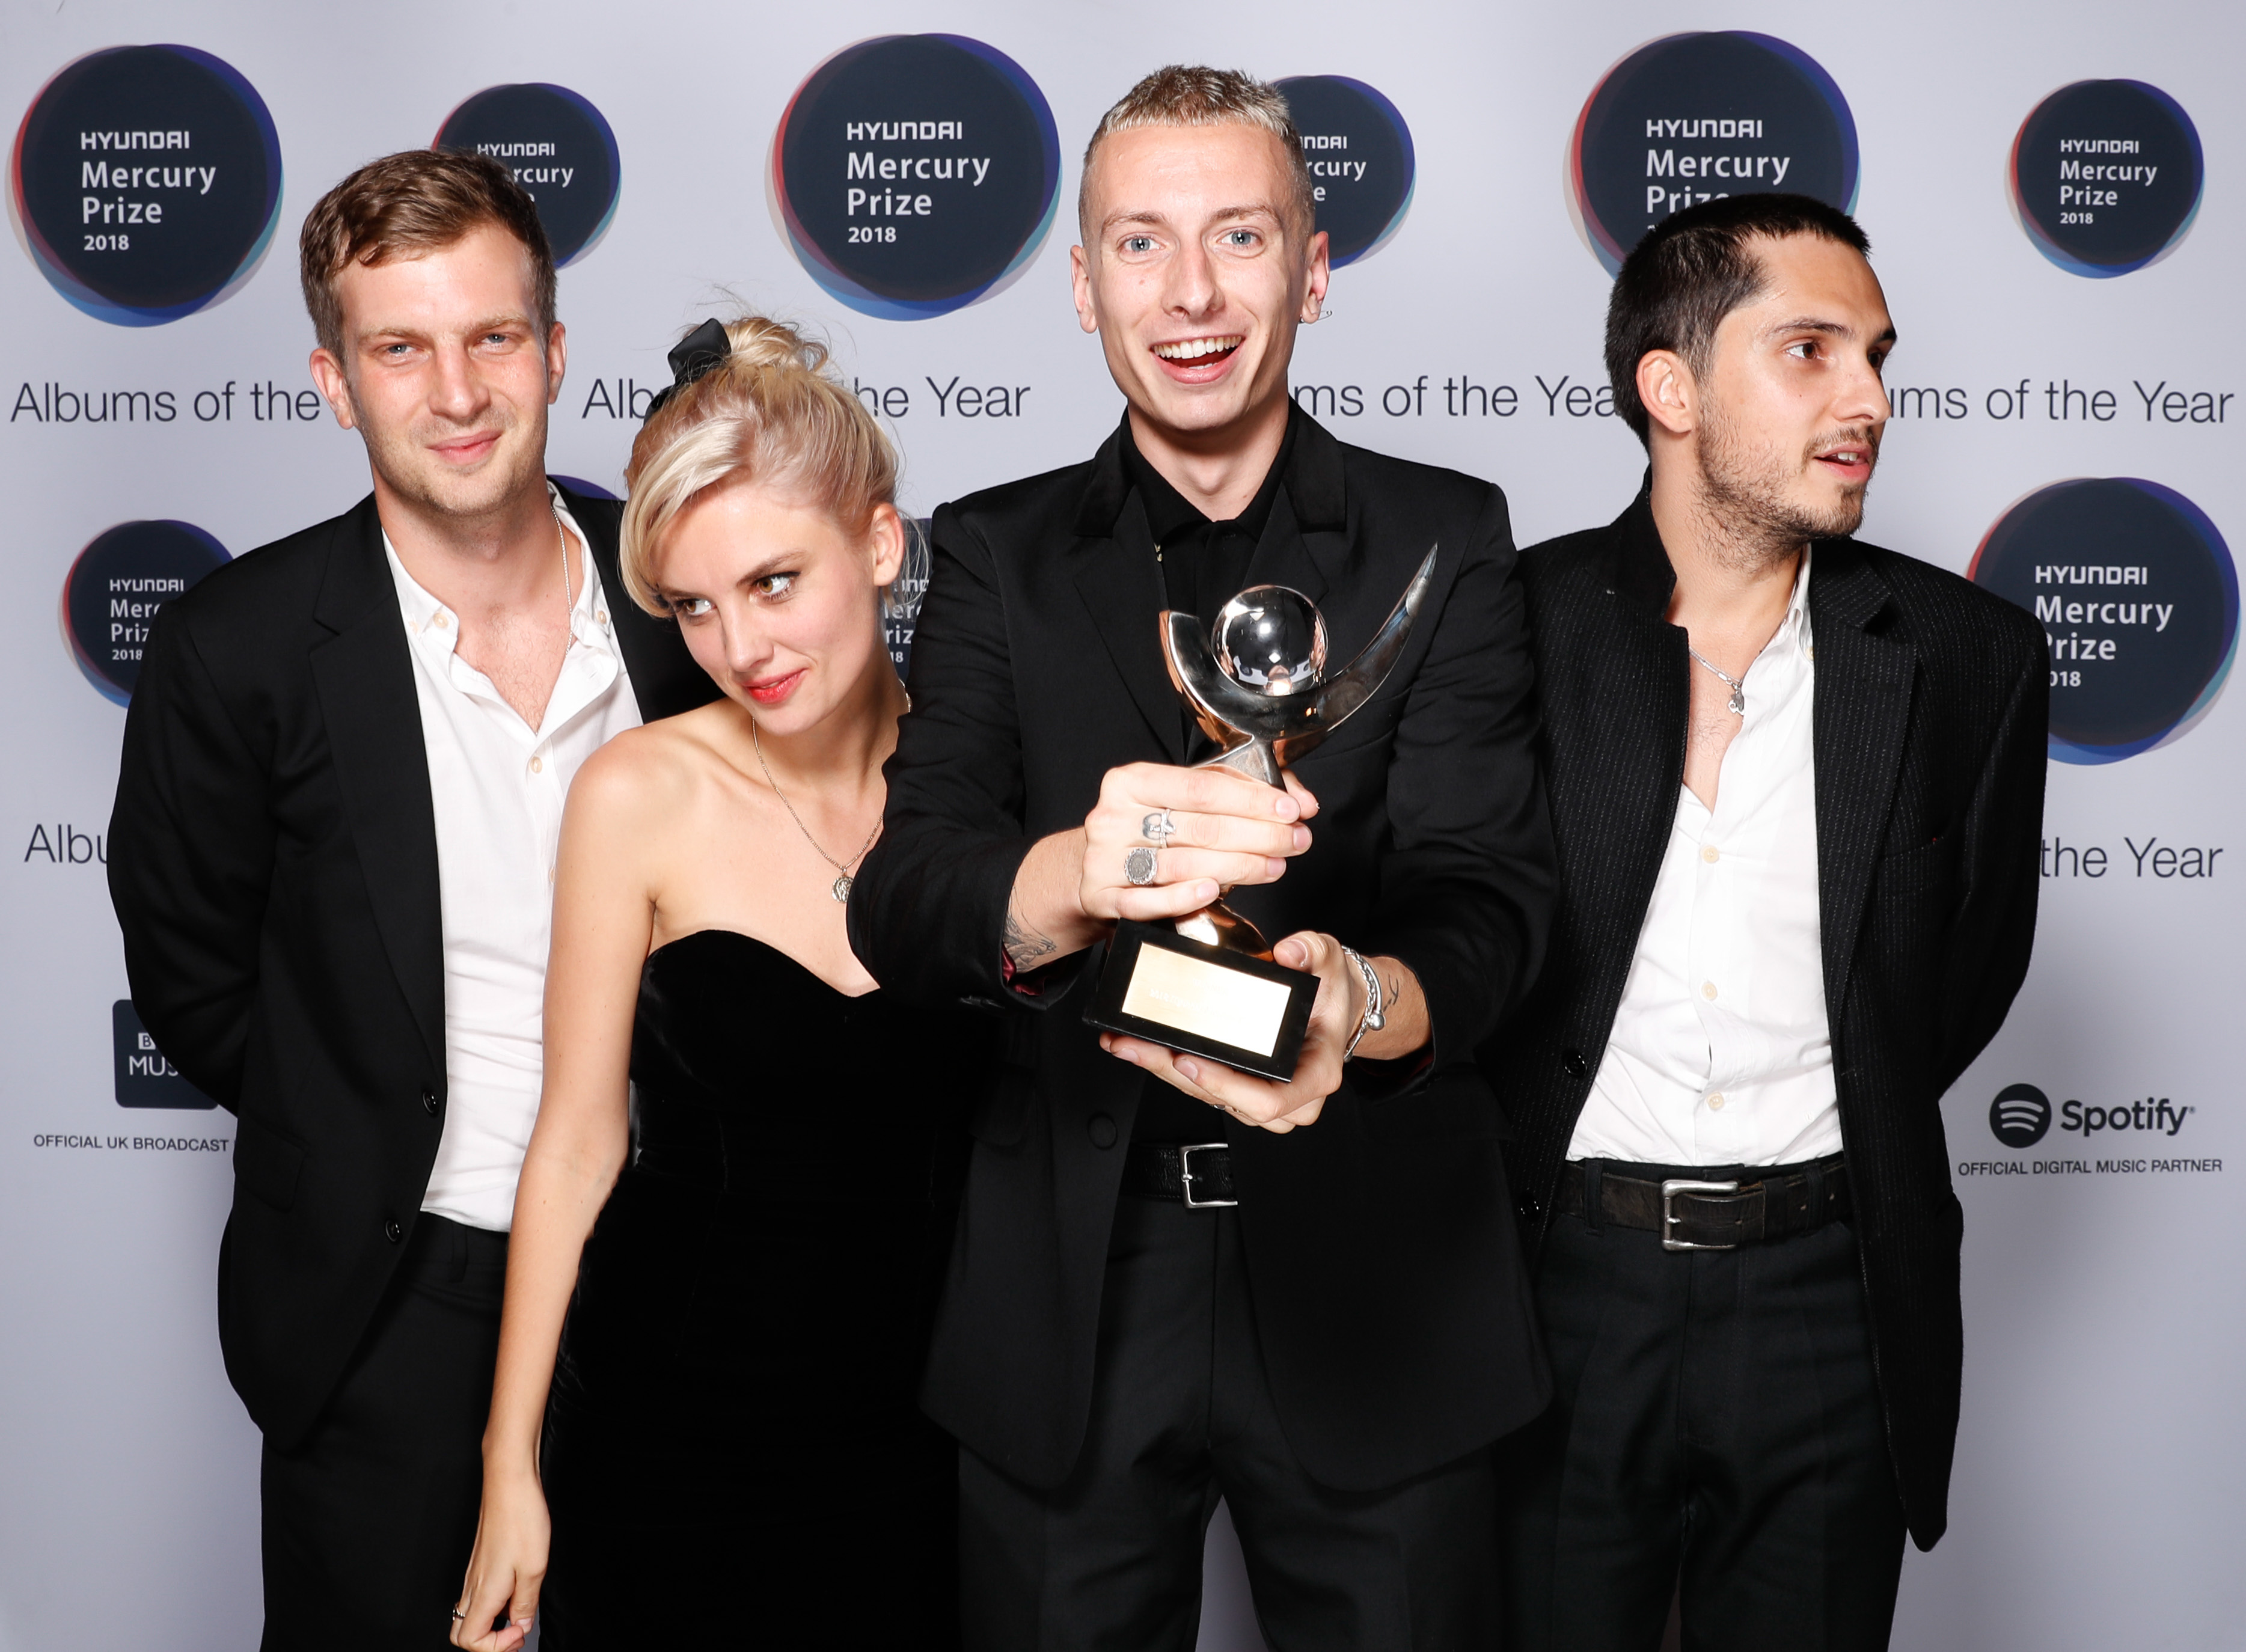 Wolf Alice win Mercury Prize, “Now I know what overwhelmed feels like”